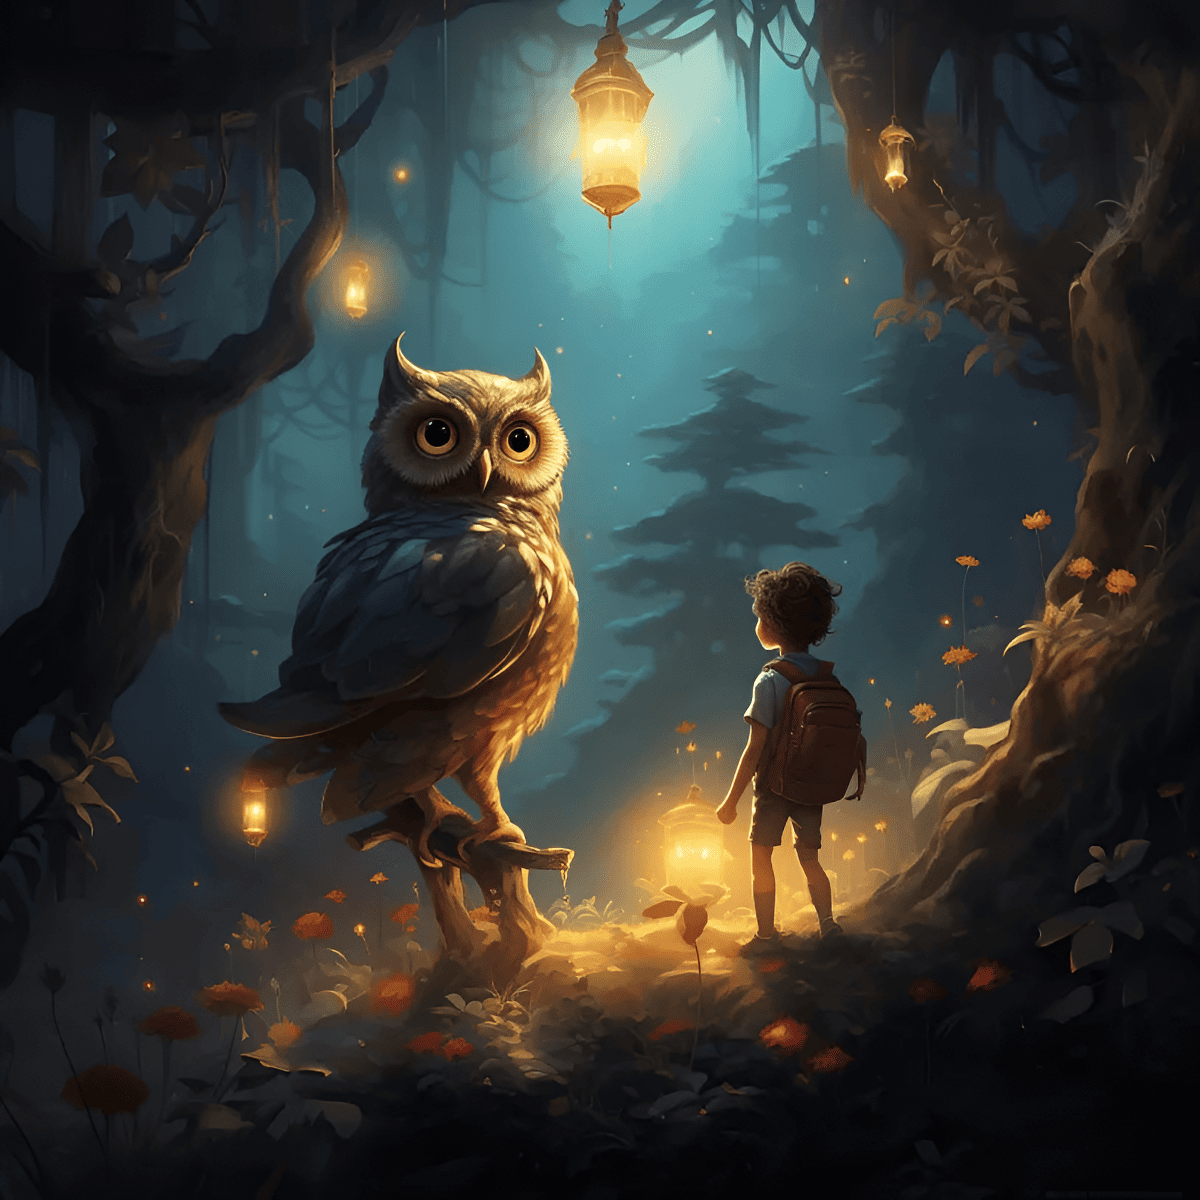 a boy sees the owl in the forest